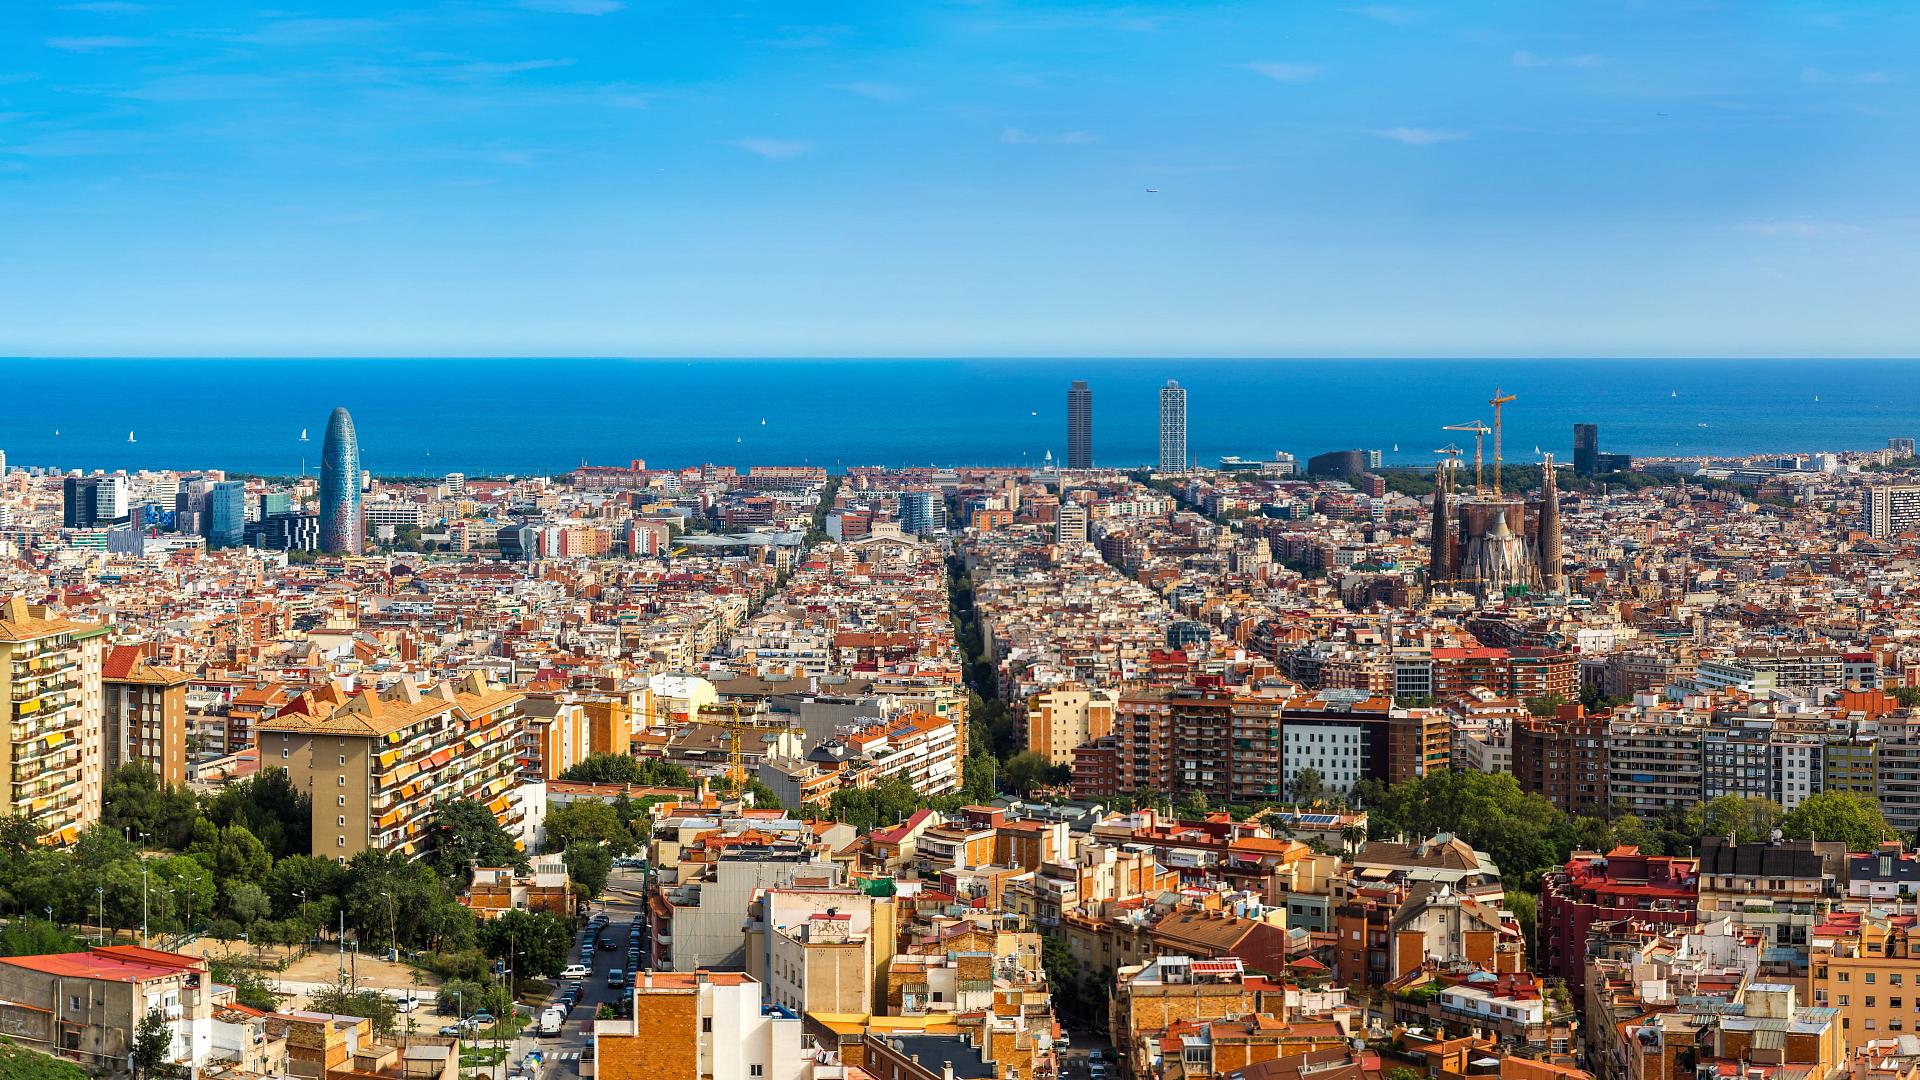 Live your getaway to Barcelona to the fullest!